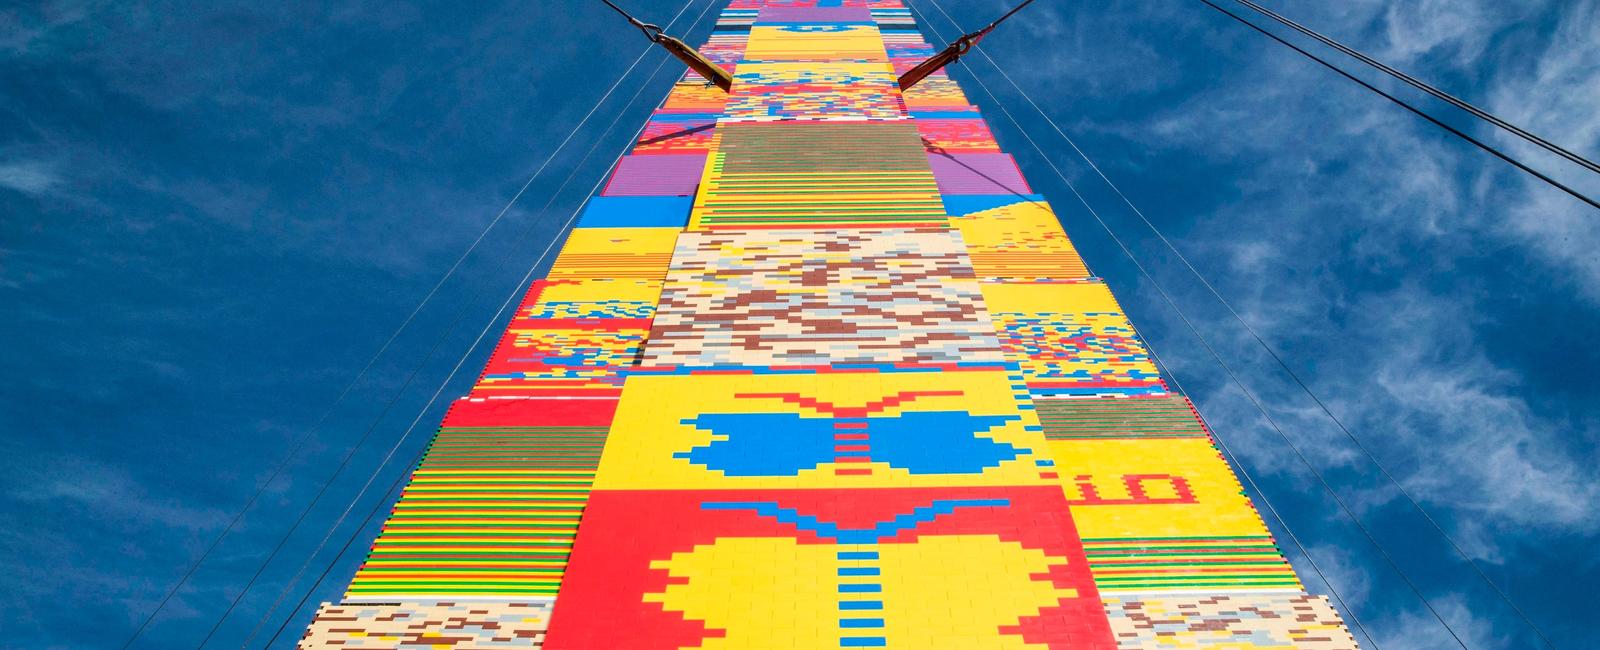 The world s tallest structure built with lego bricks was 114 feet 11 inches 35 meters tall